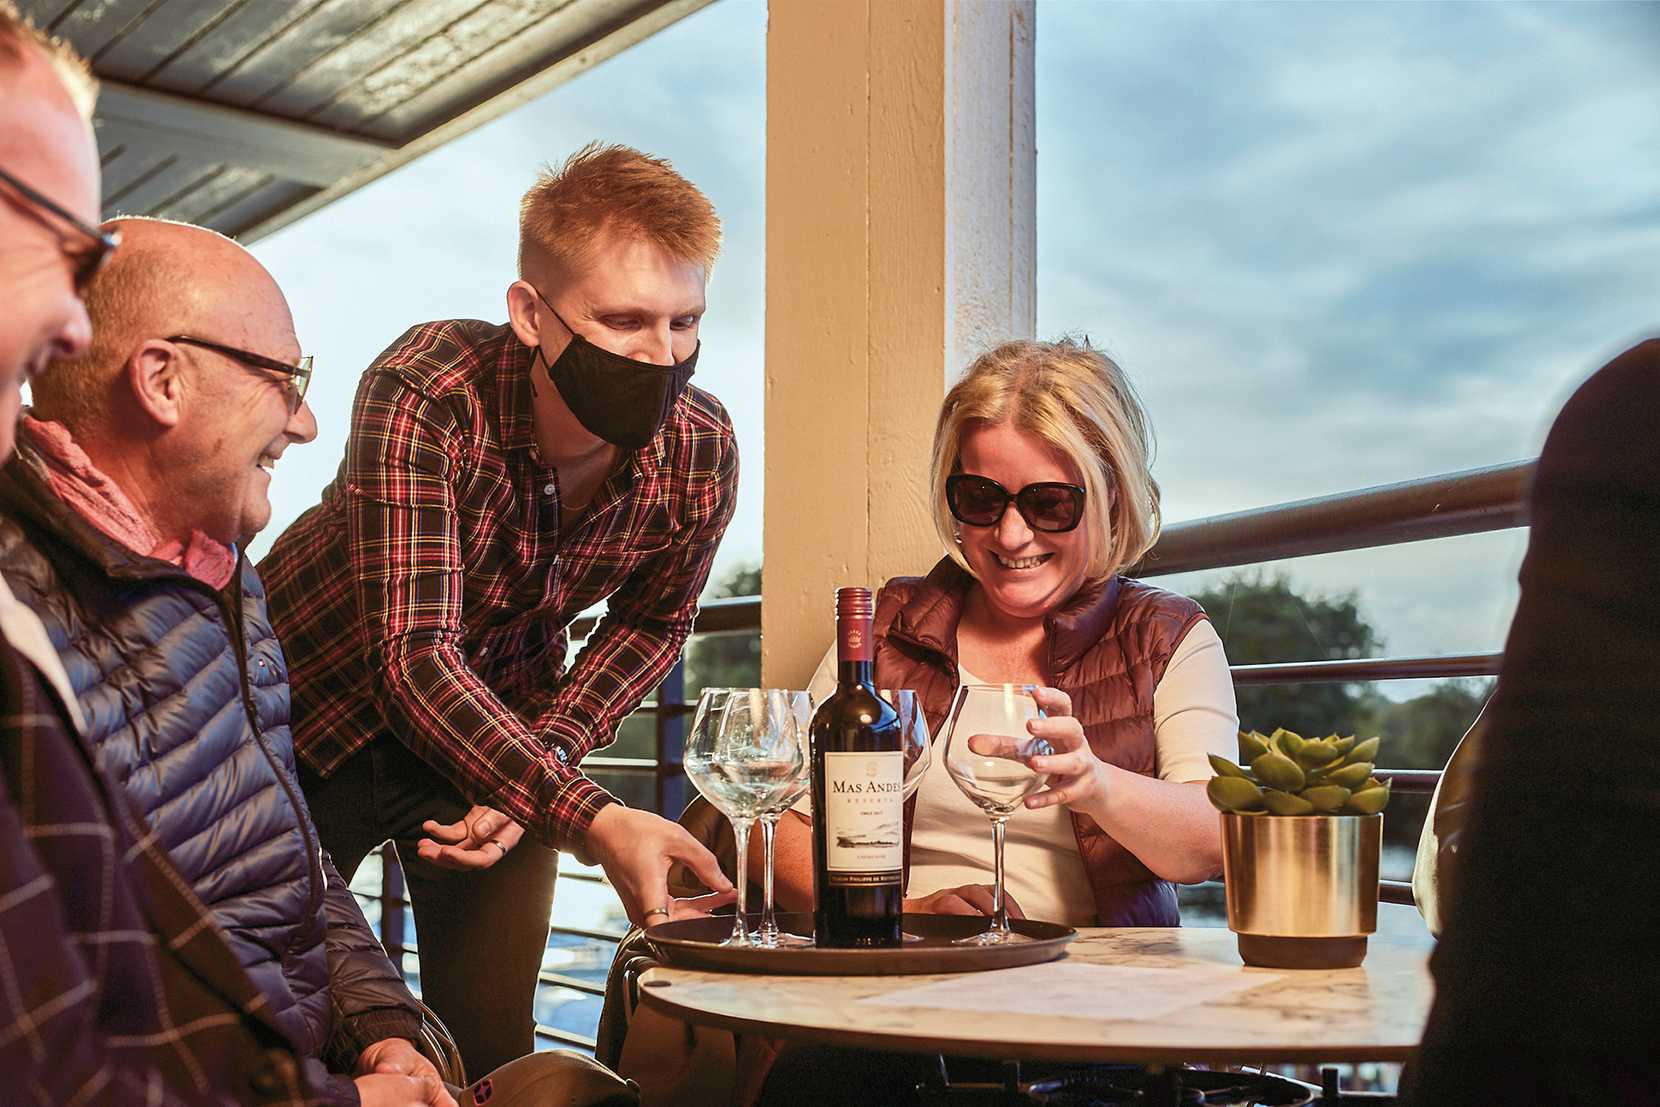 A team member in a checkered shirt and face mask delivers a bottle of red wine and four glasses to a table of smiling guests.